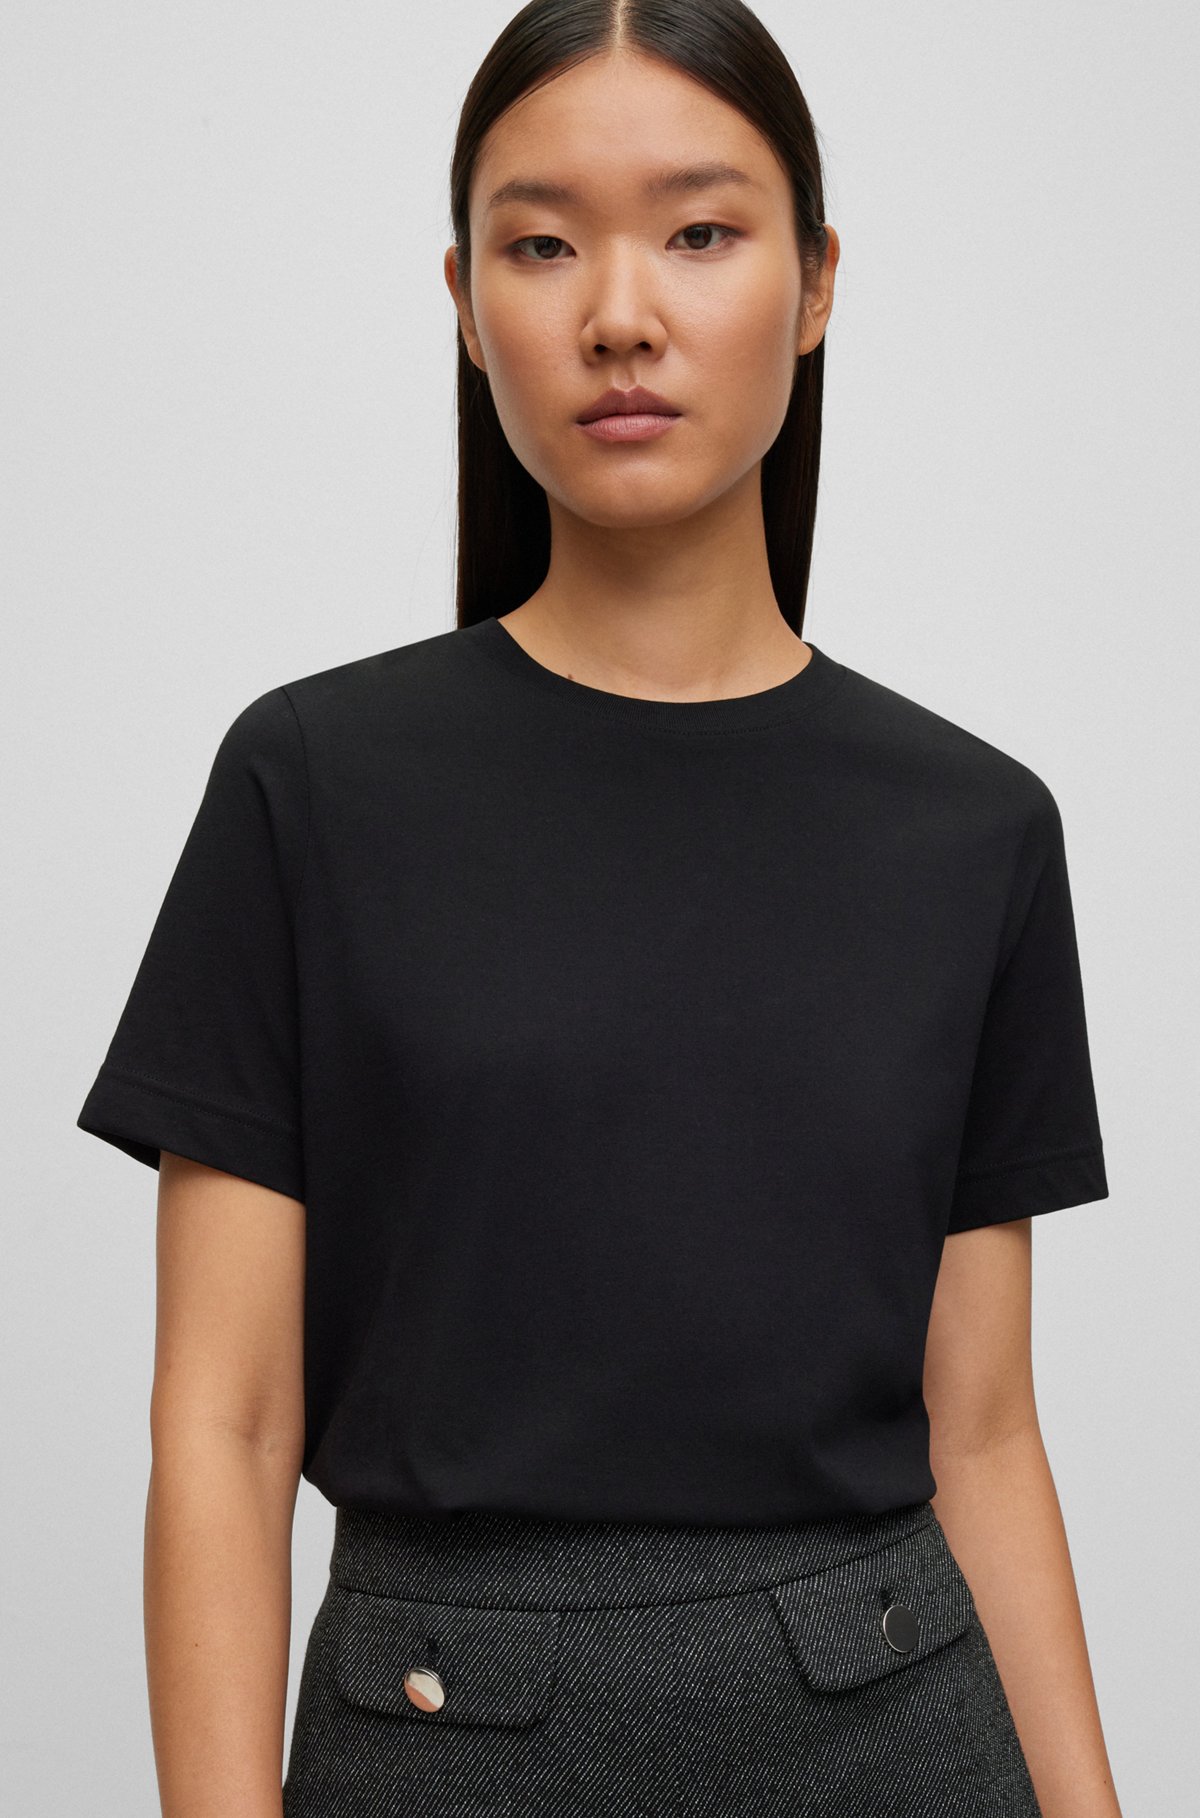 Relaxed-fit T-shirt in cotton jersey, Black